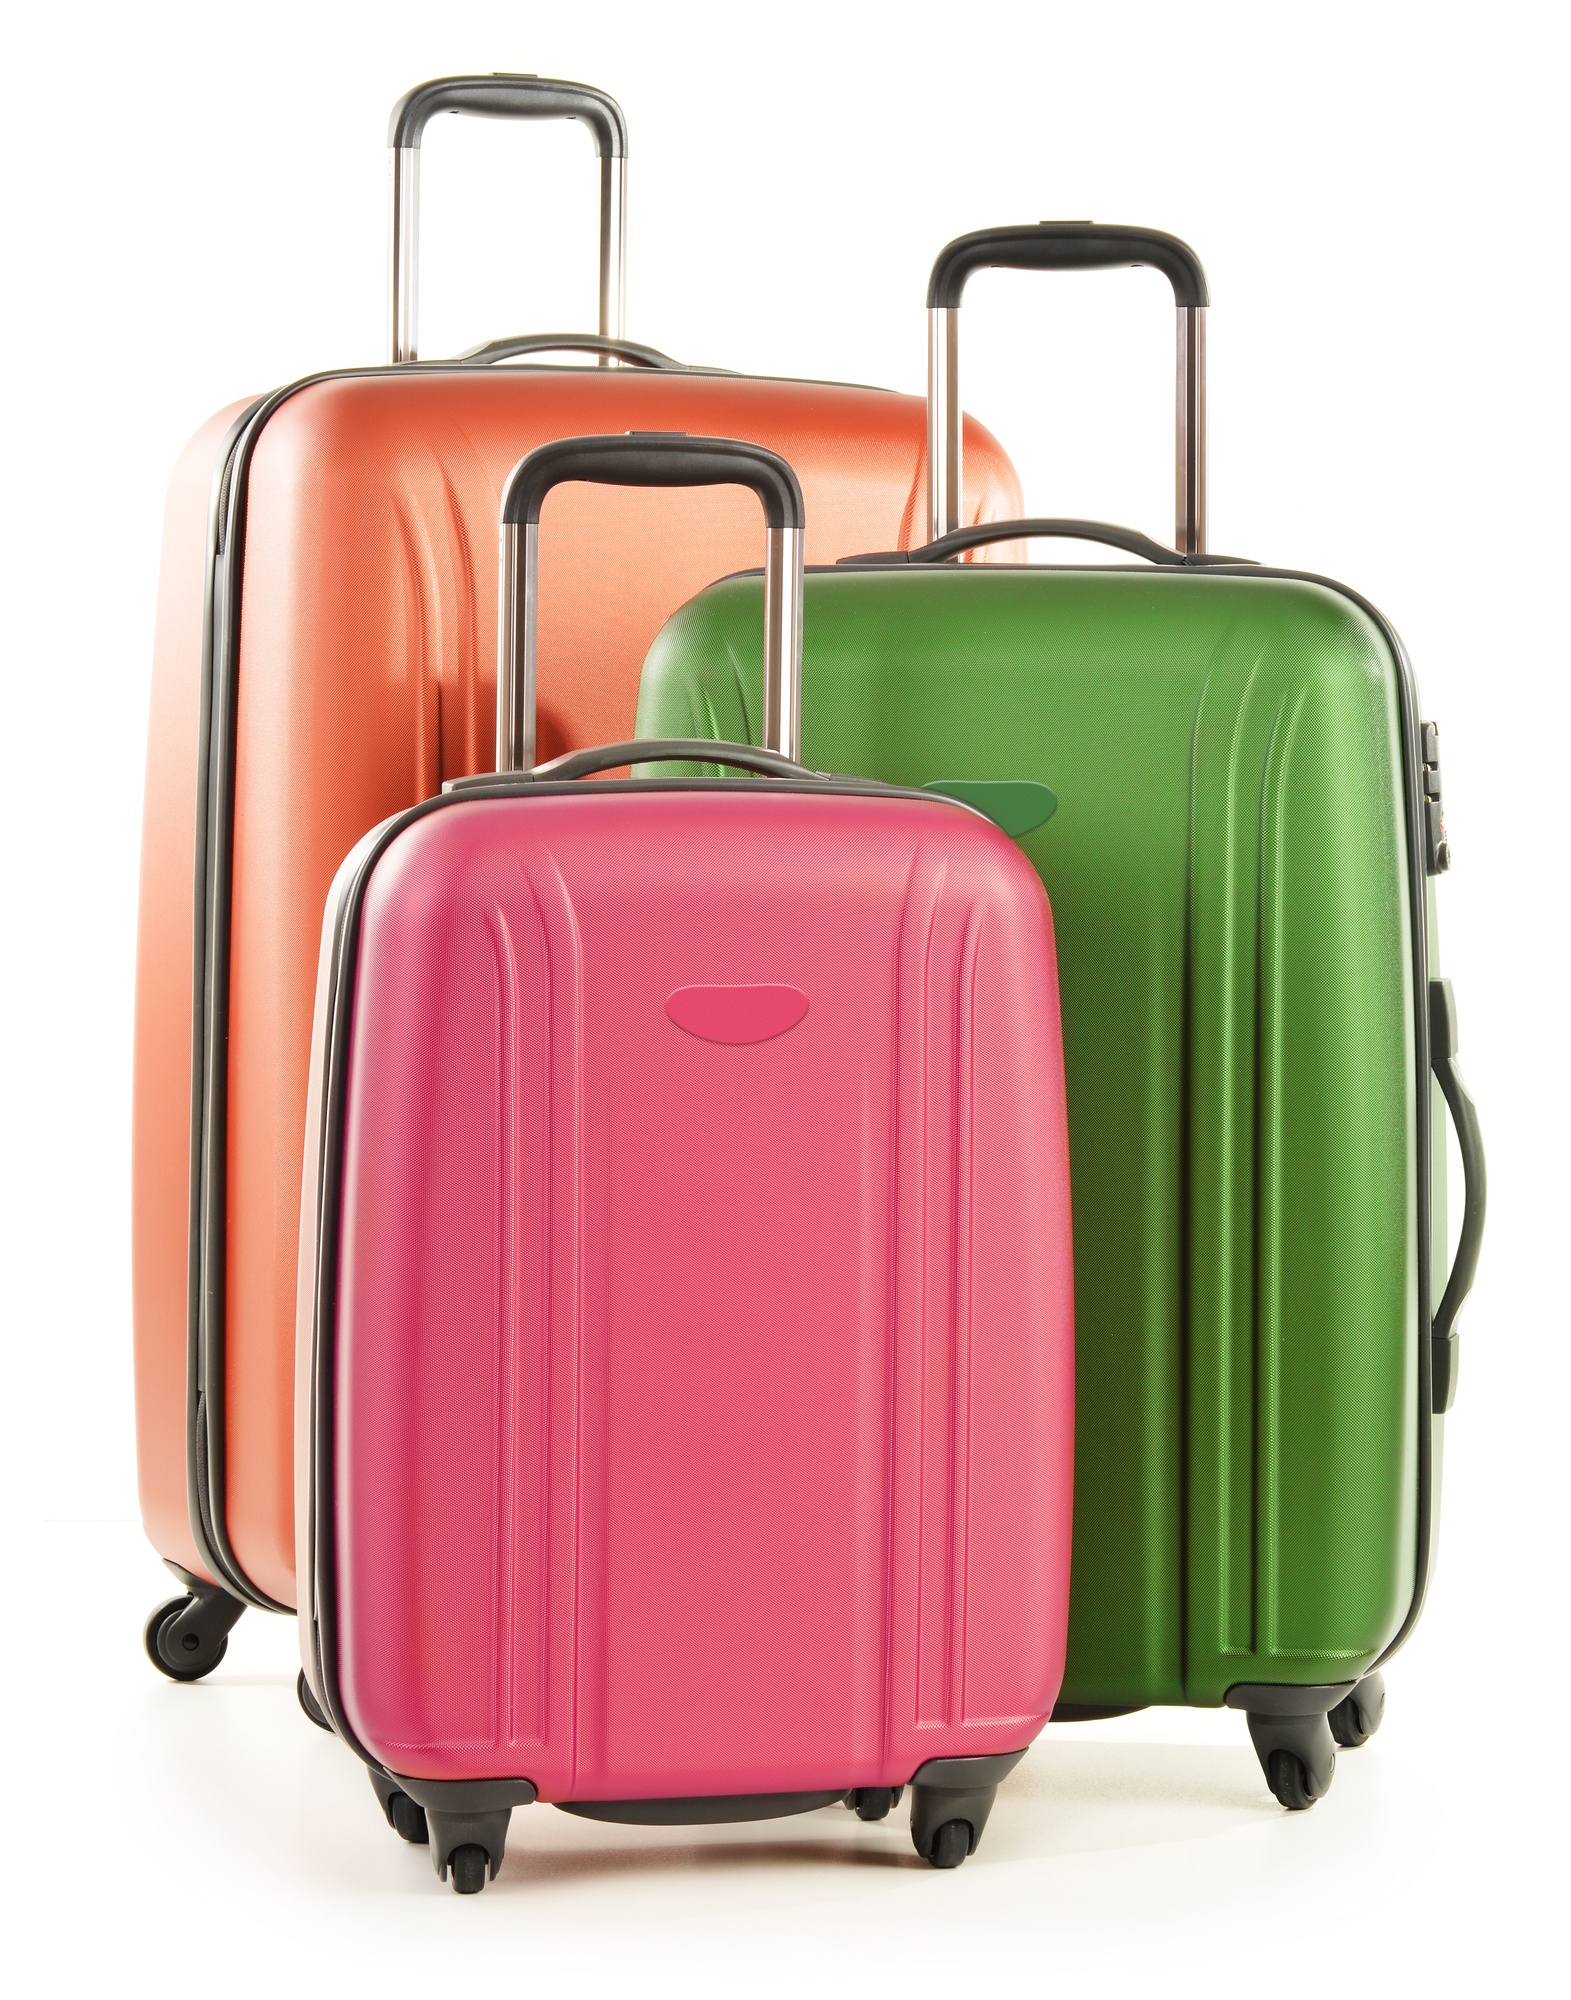 Colorful suitcases